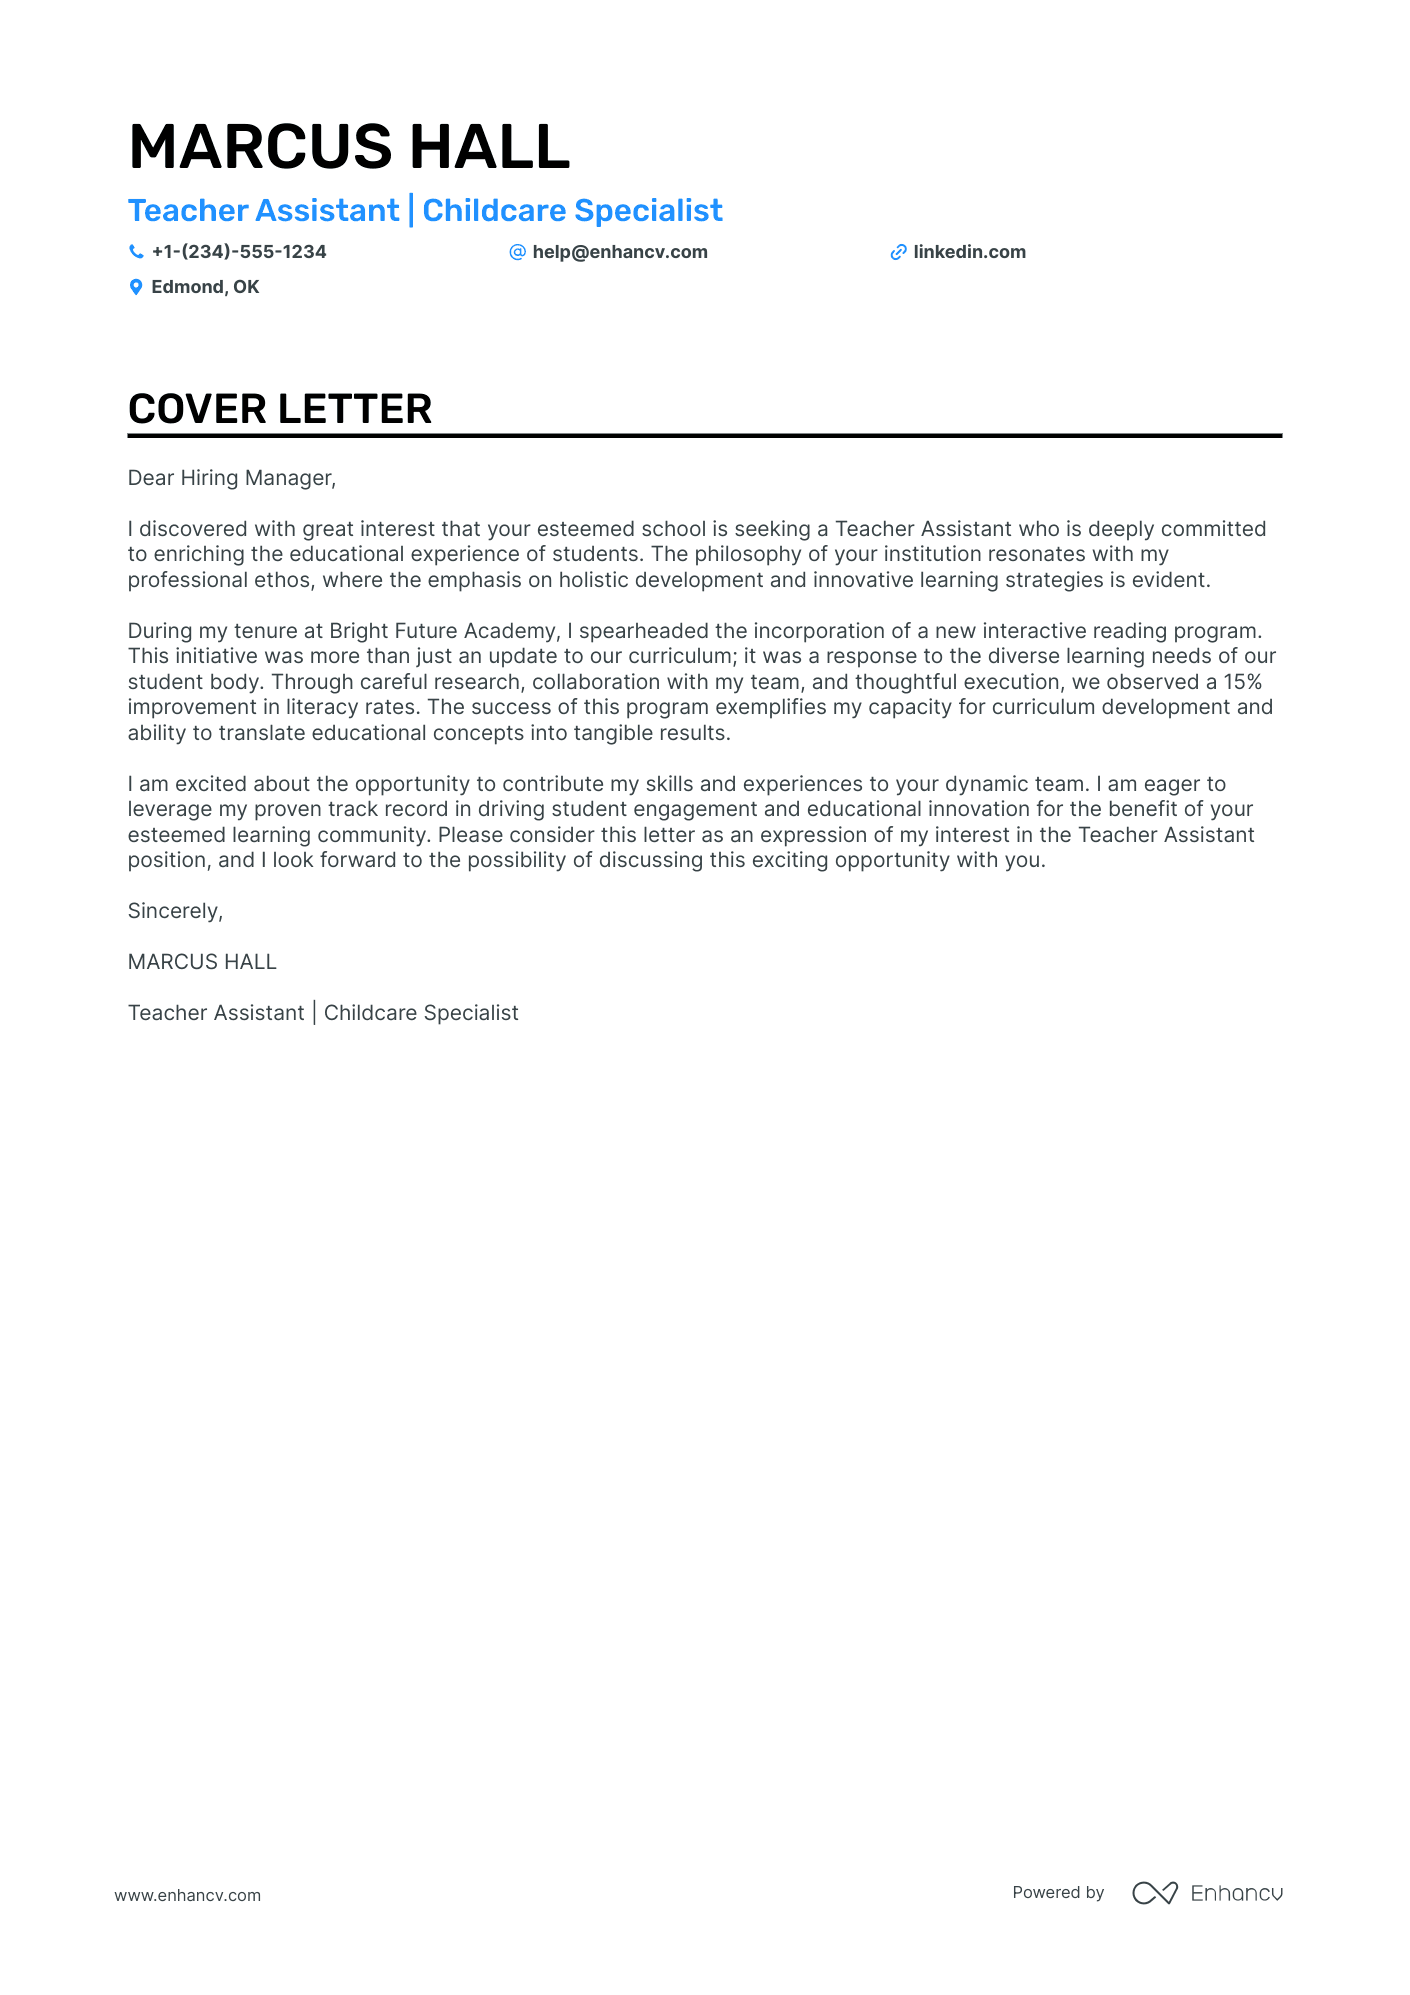 Graduate Teaching Assistant cover letter